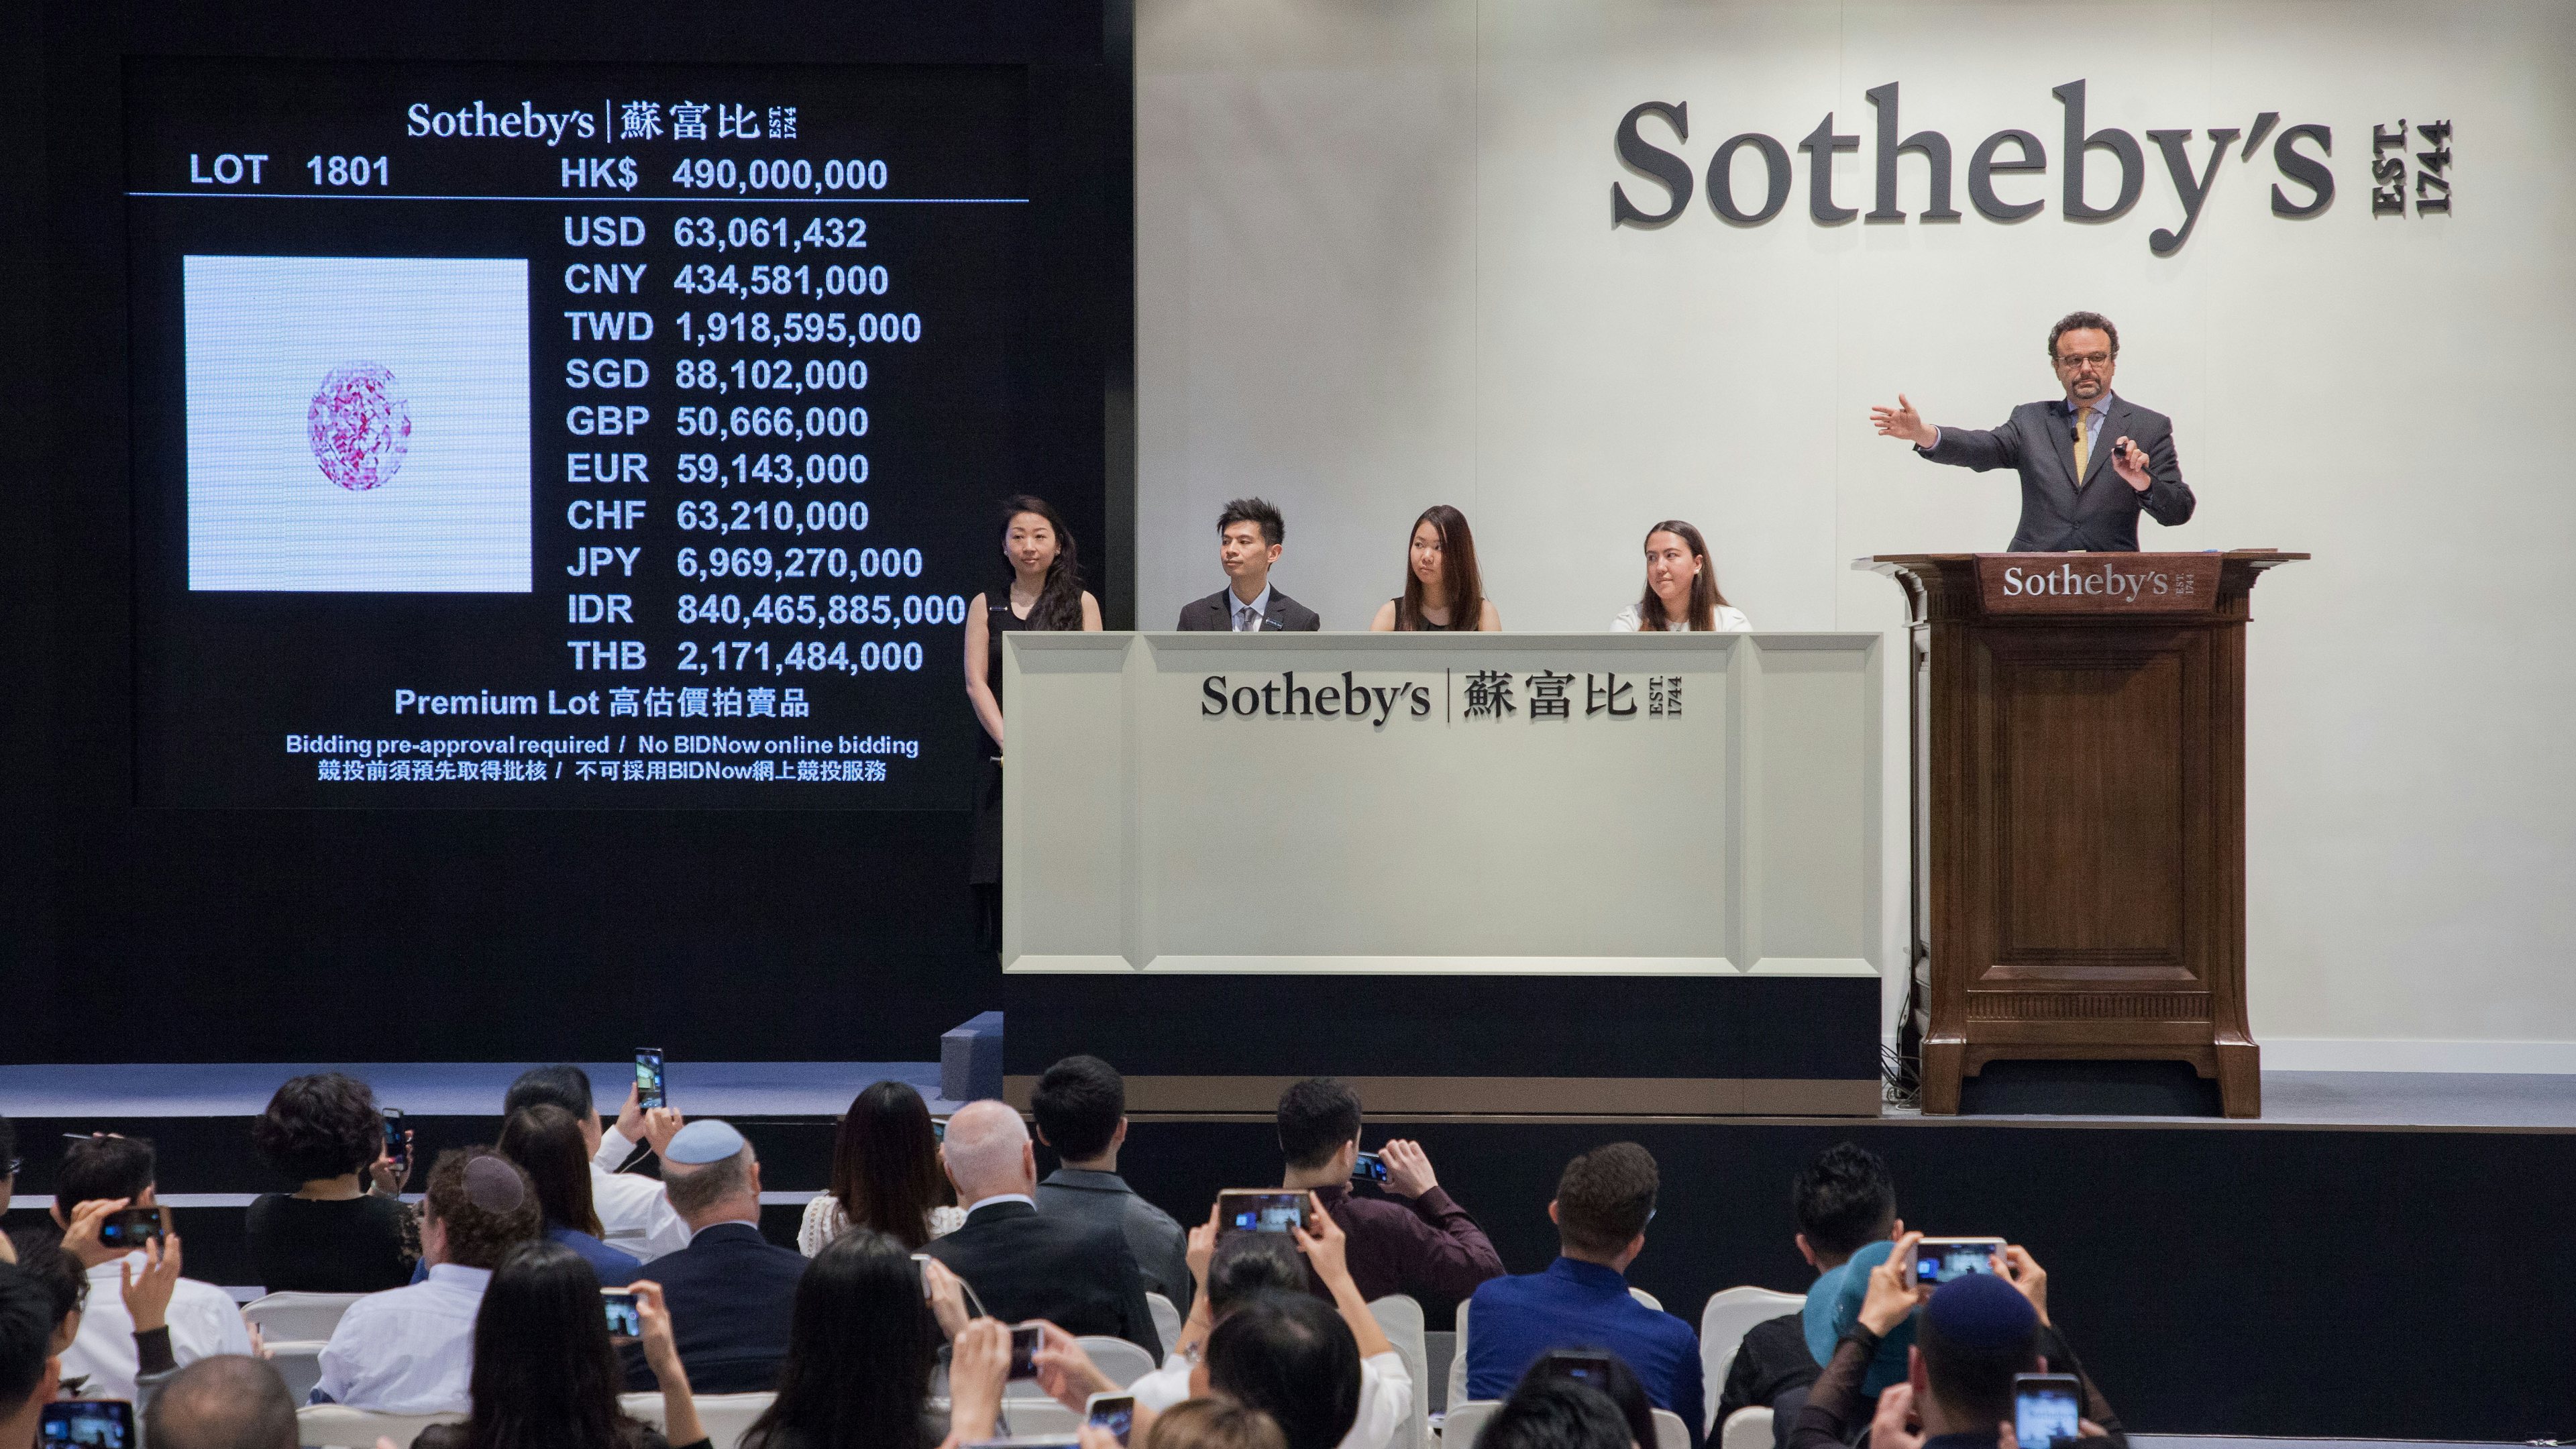 The rare 'Pink Star' diamond was sold at a Sotheby's auction on April 4 via a phone bid to Chow Tai Fook chairman Henry Cheng Kar-Shun. (Courtesy Photo)